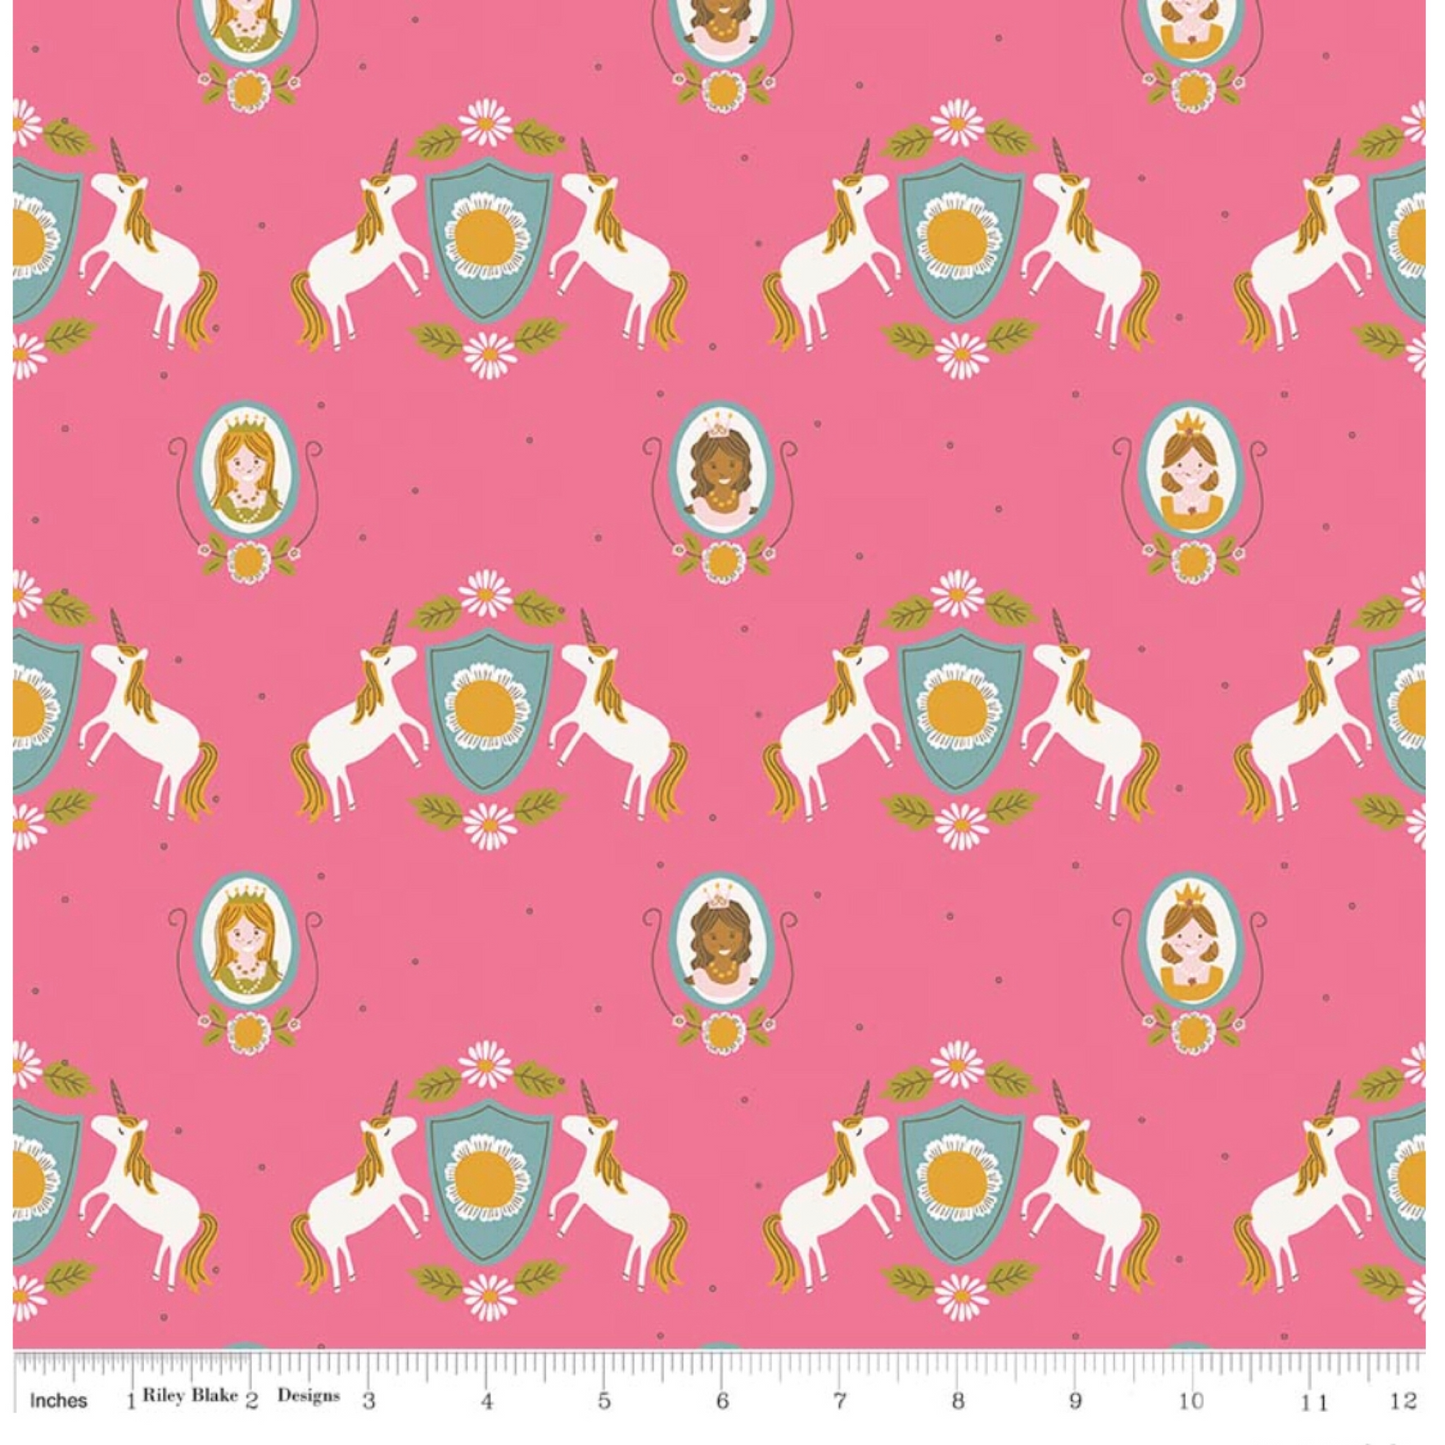 Hot Pink Guinevere Main Unicorns - Guinevere by Riley Blake - 100% Cotton Fabric - Rosie's Craft Shop Ltd